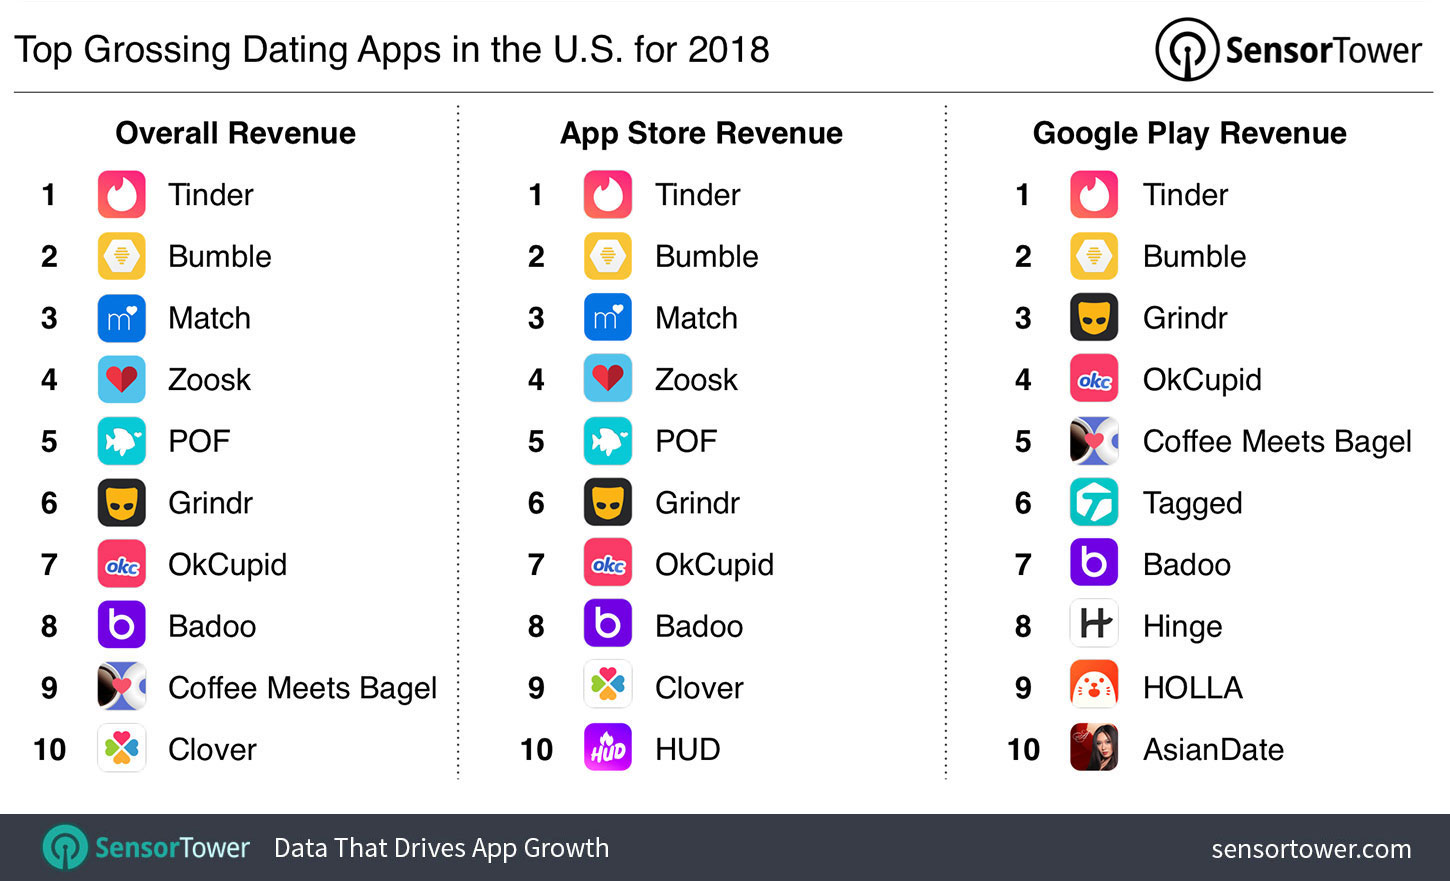 Top Grossing Dating Apps in the U.S. for 2018